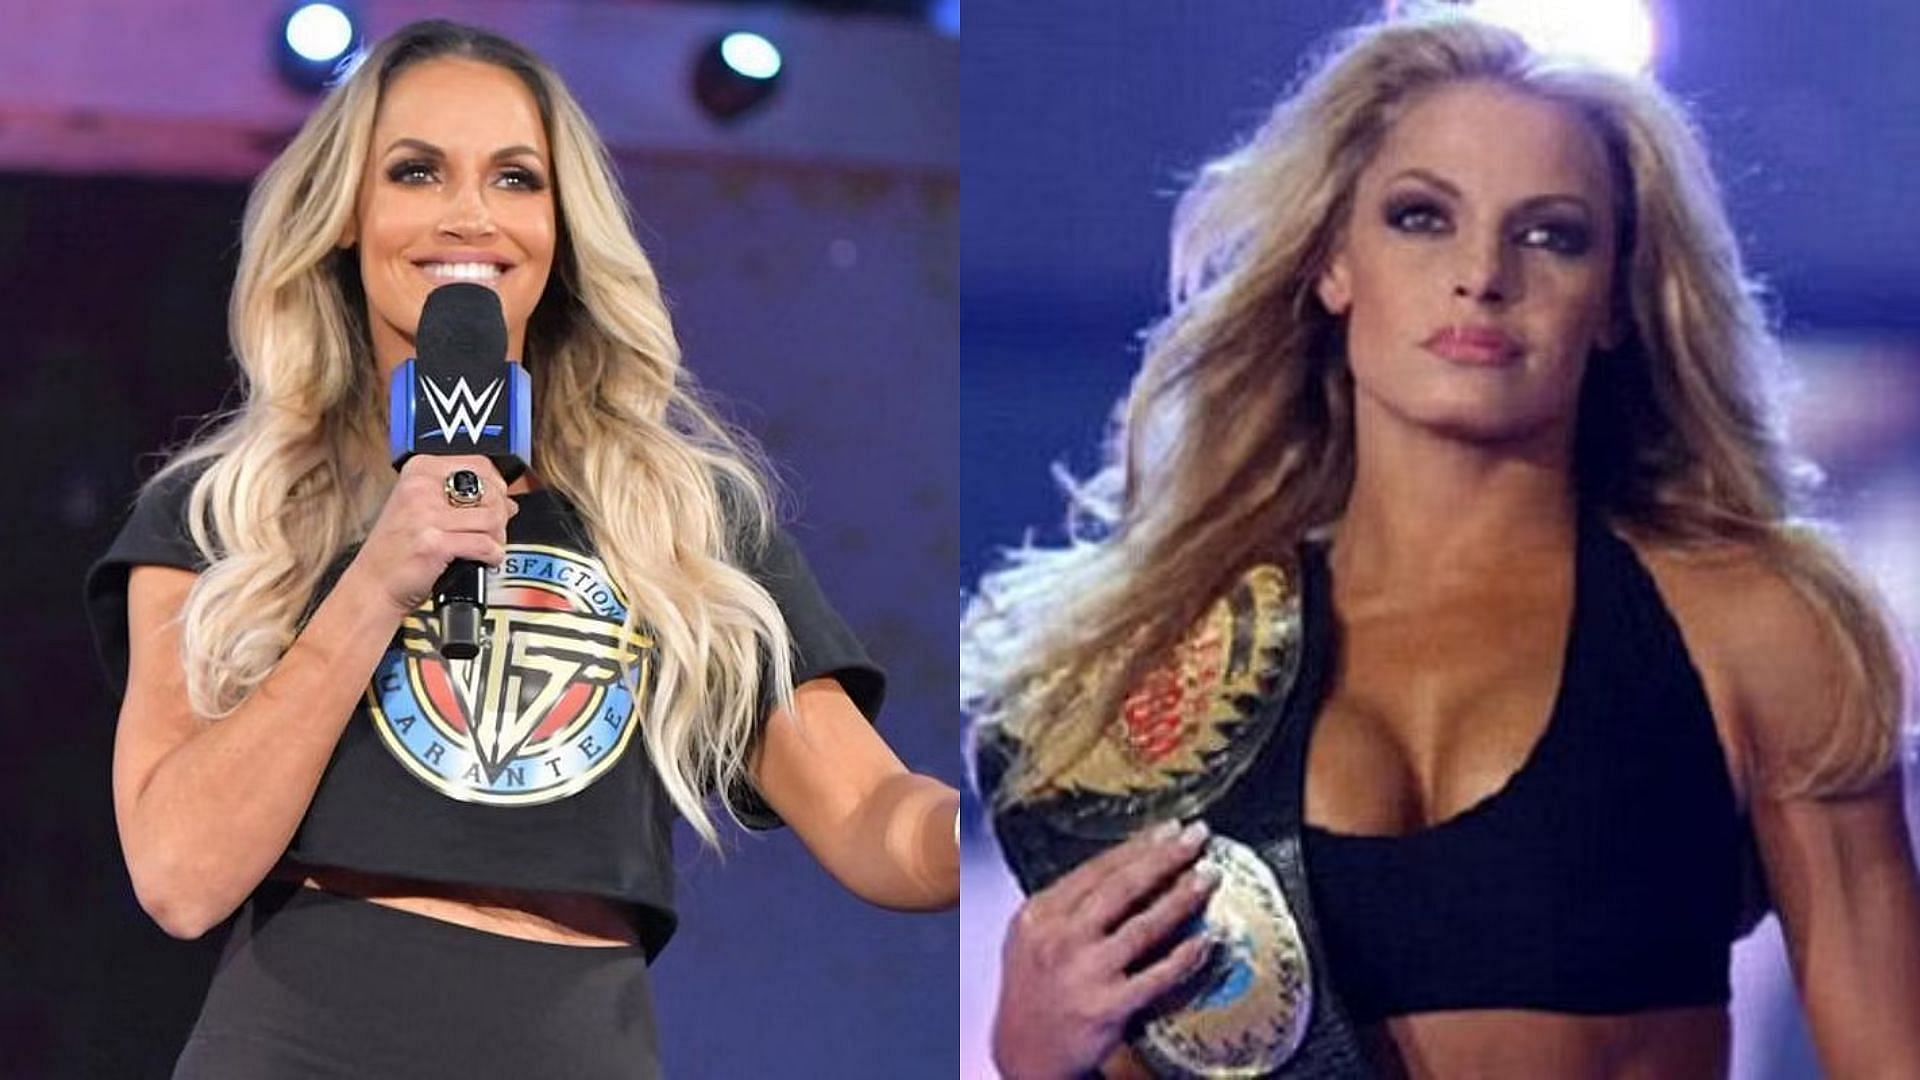 Trish Stratus is a Hall of Famer